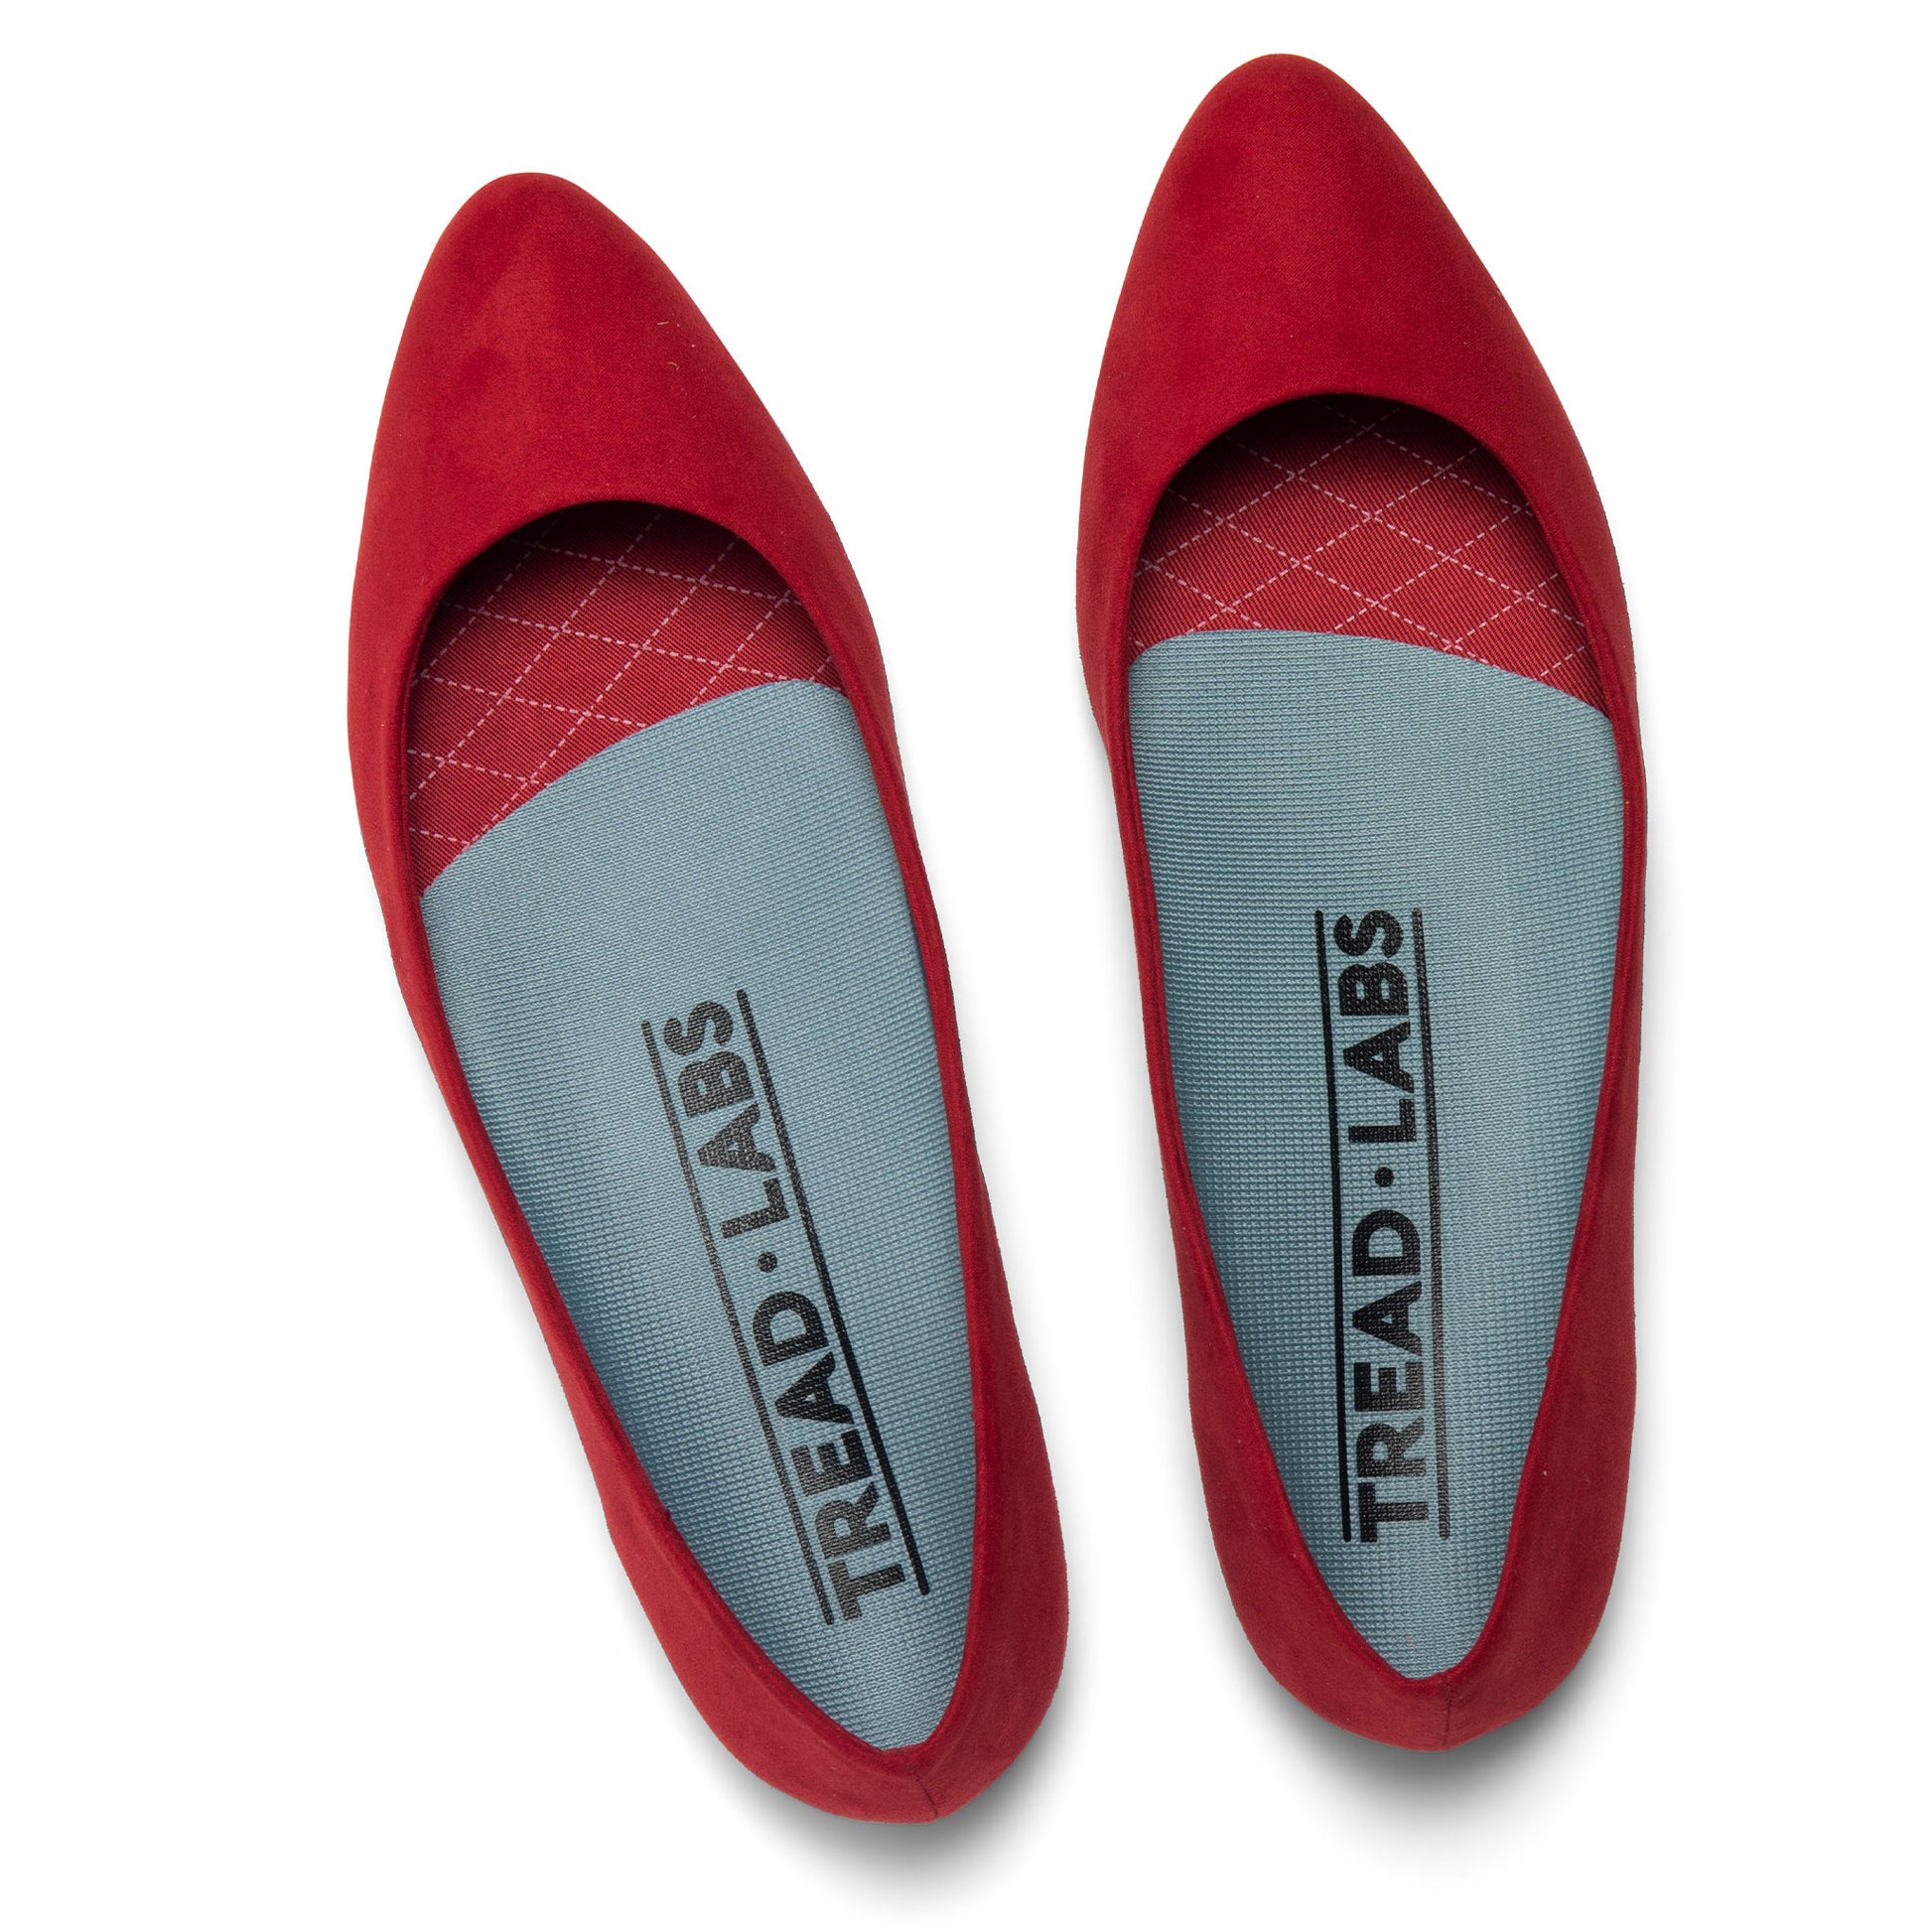 Pace Short Insoles For Women's Flats